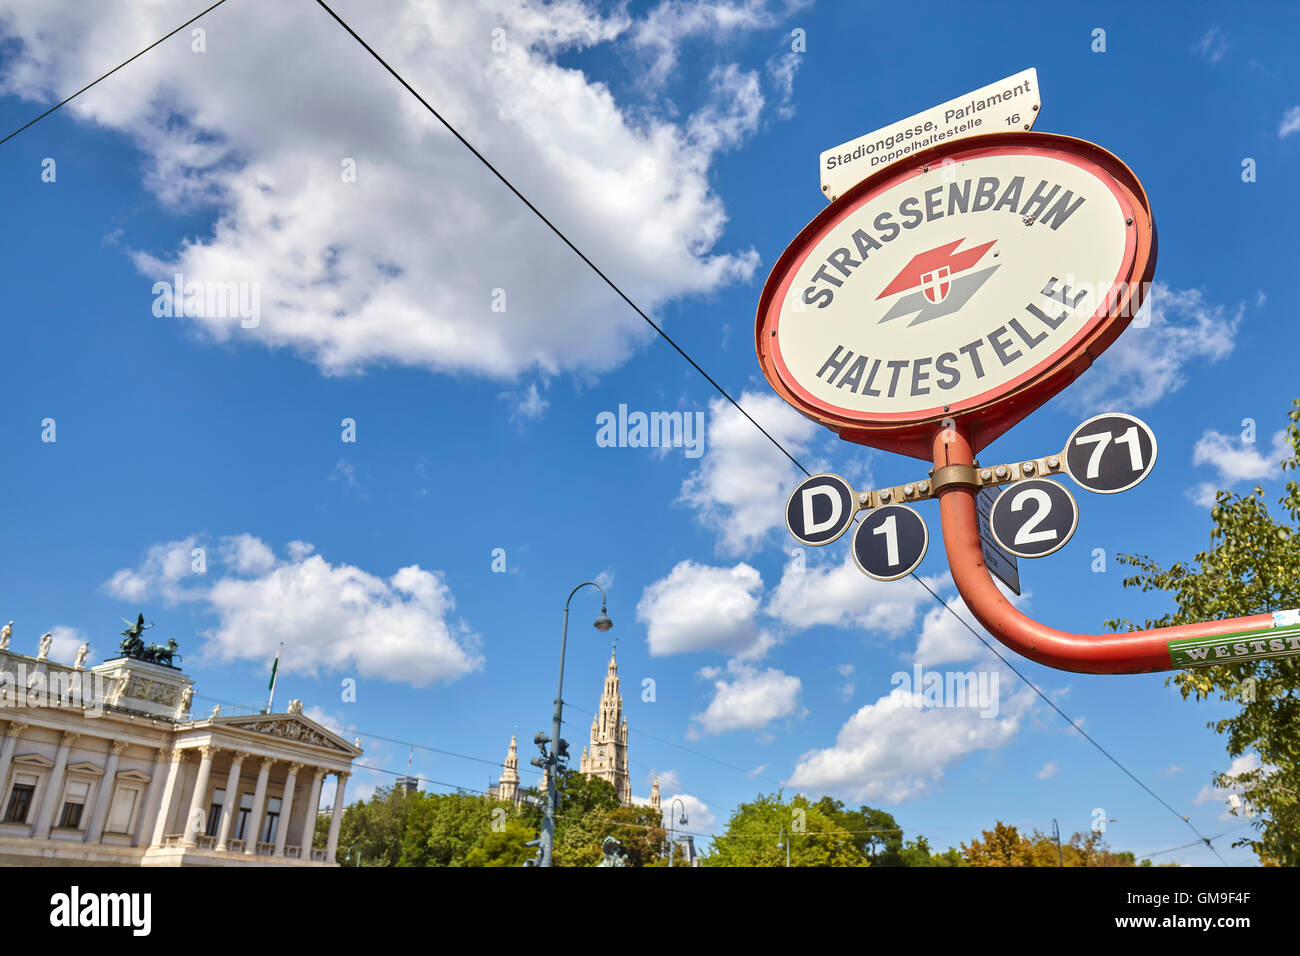 Tram stop sign in front of Austrian Parliament building. Stock Photo